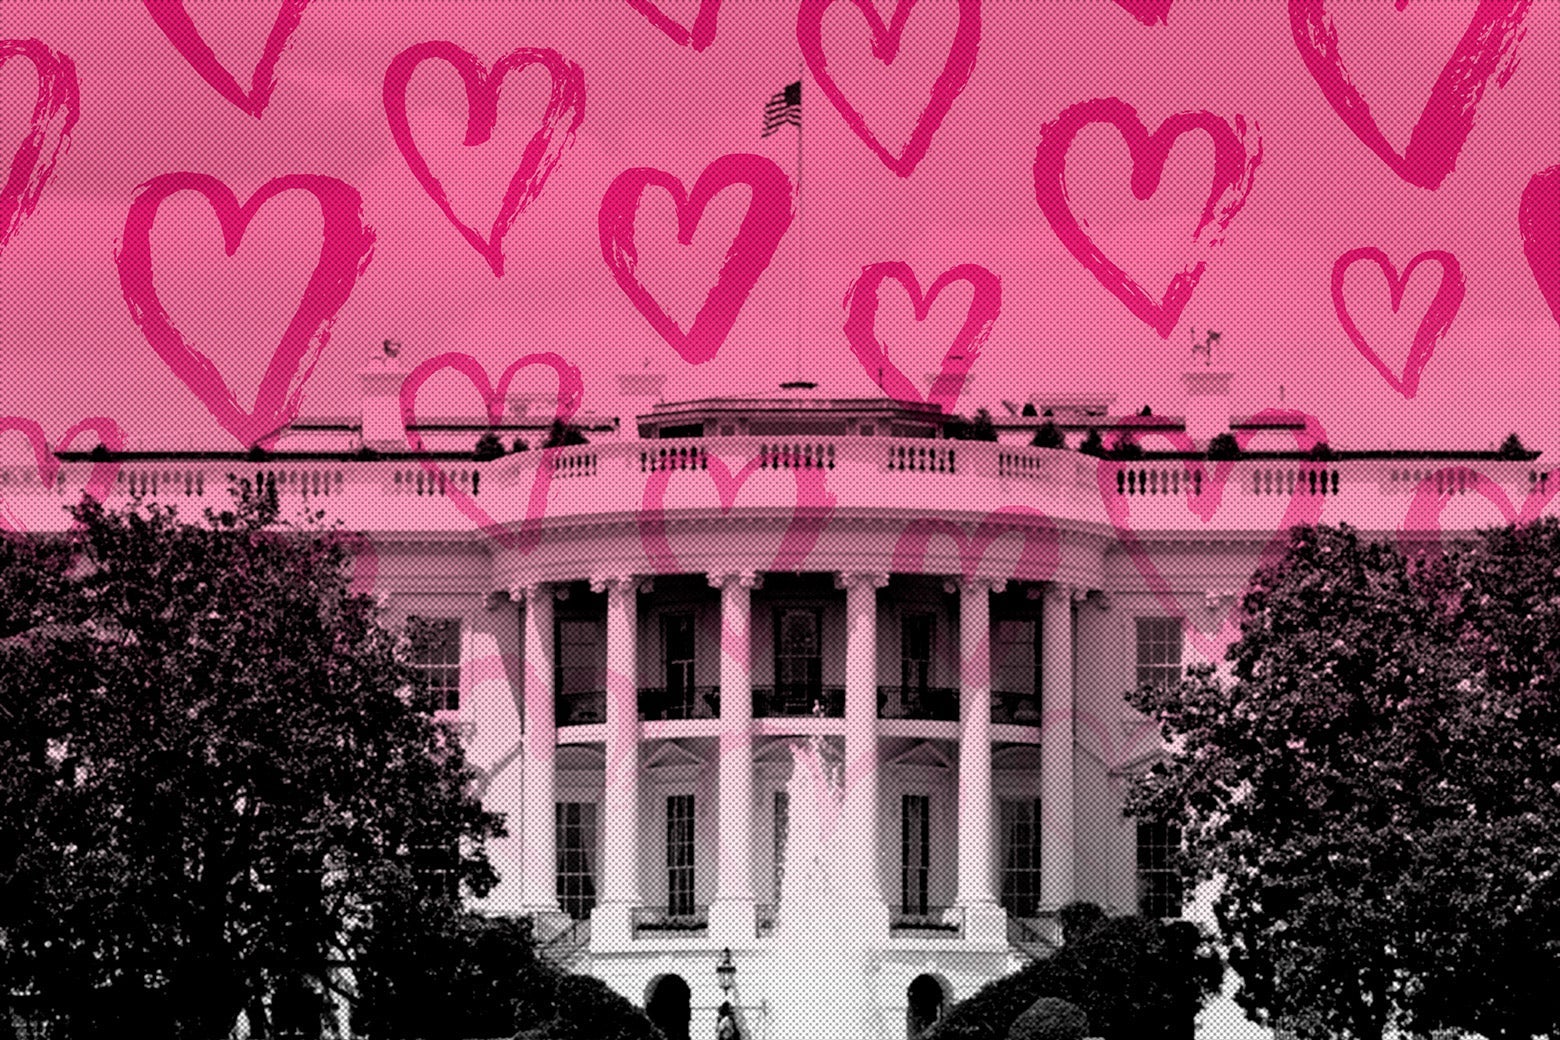 The White House with a pink overlay of hearts.